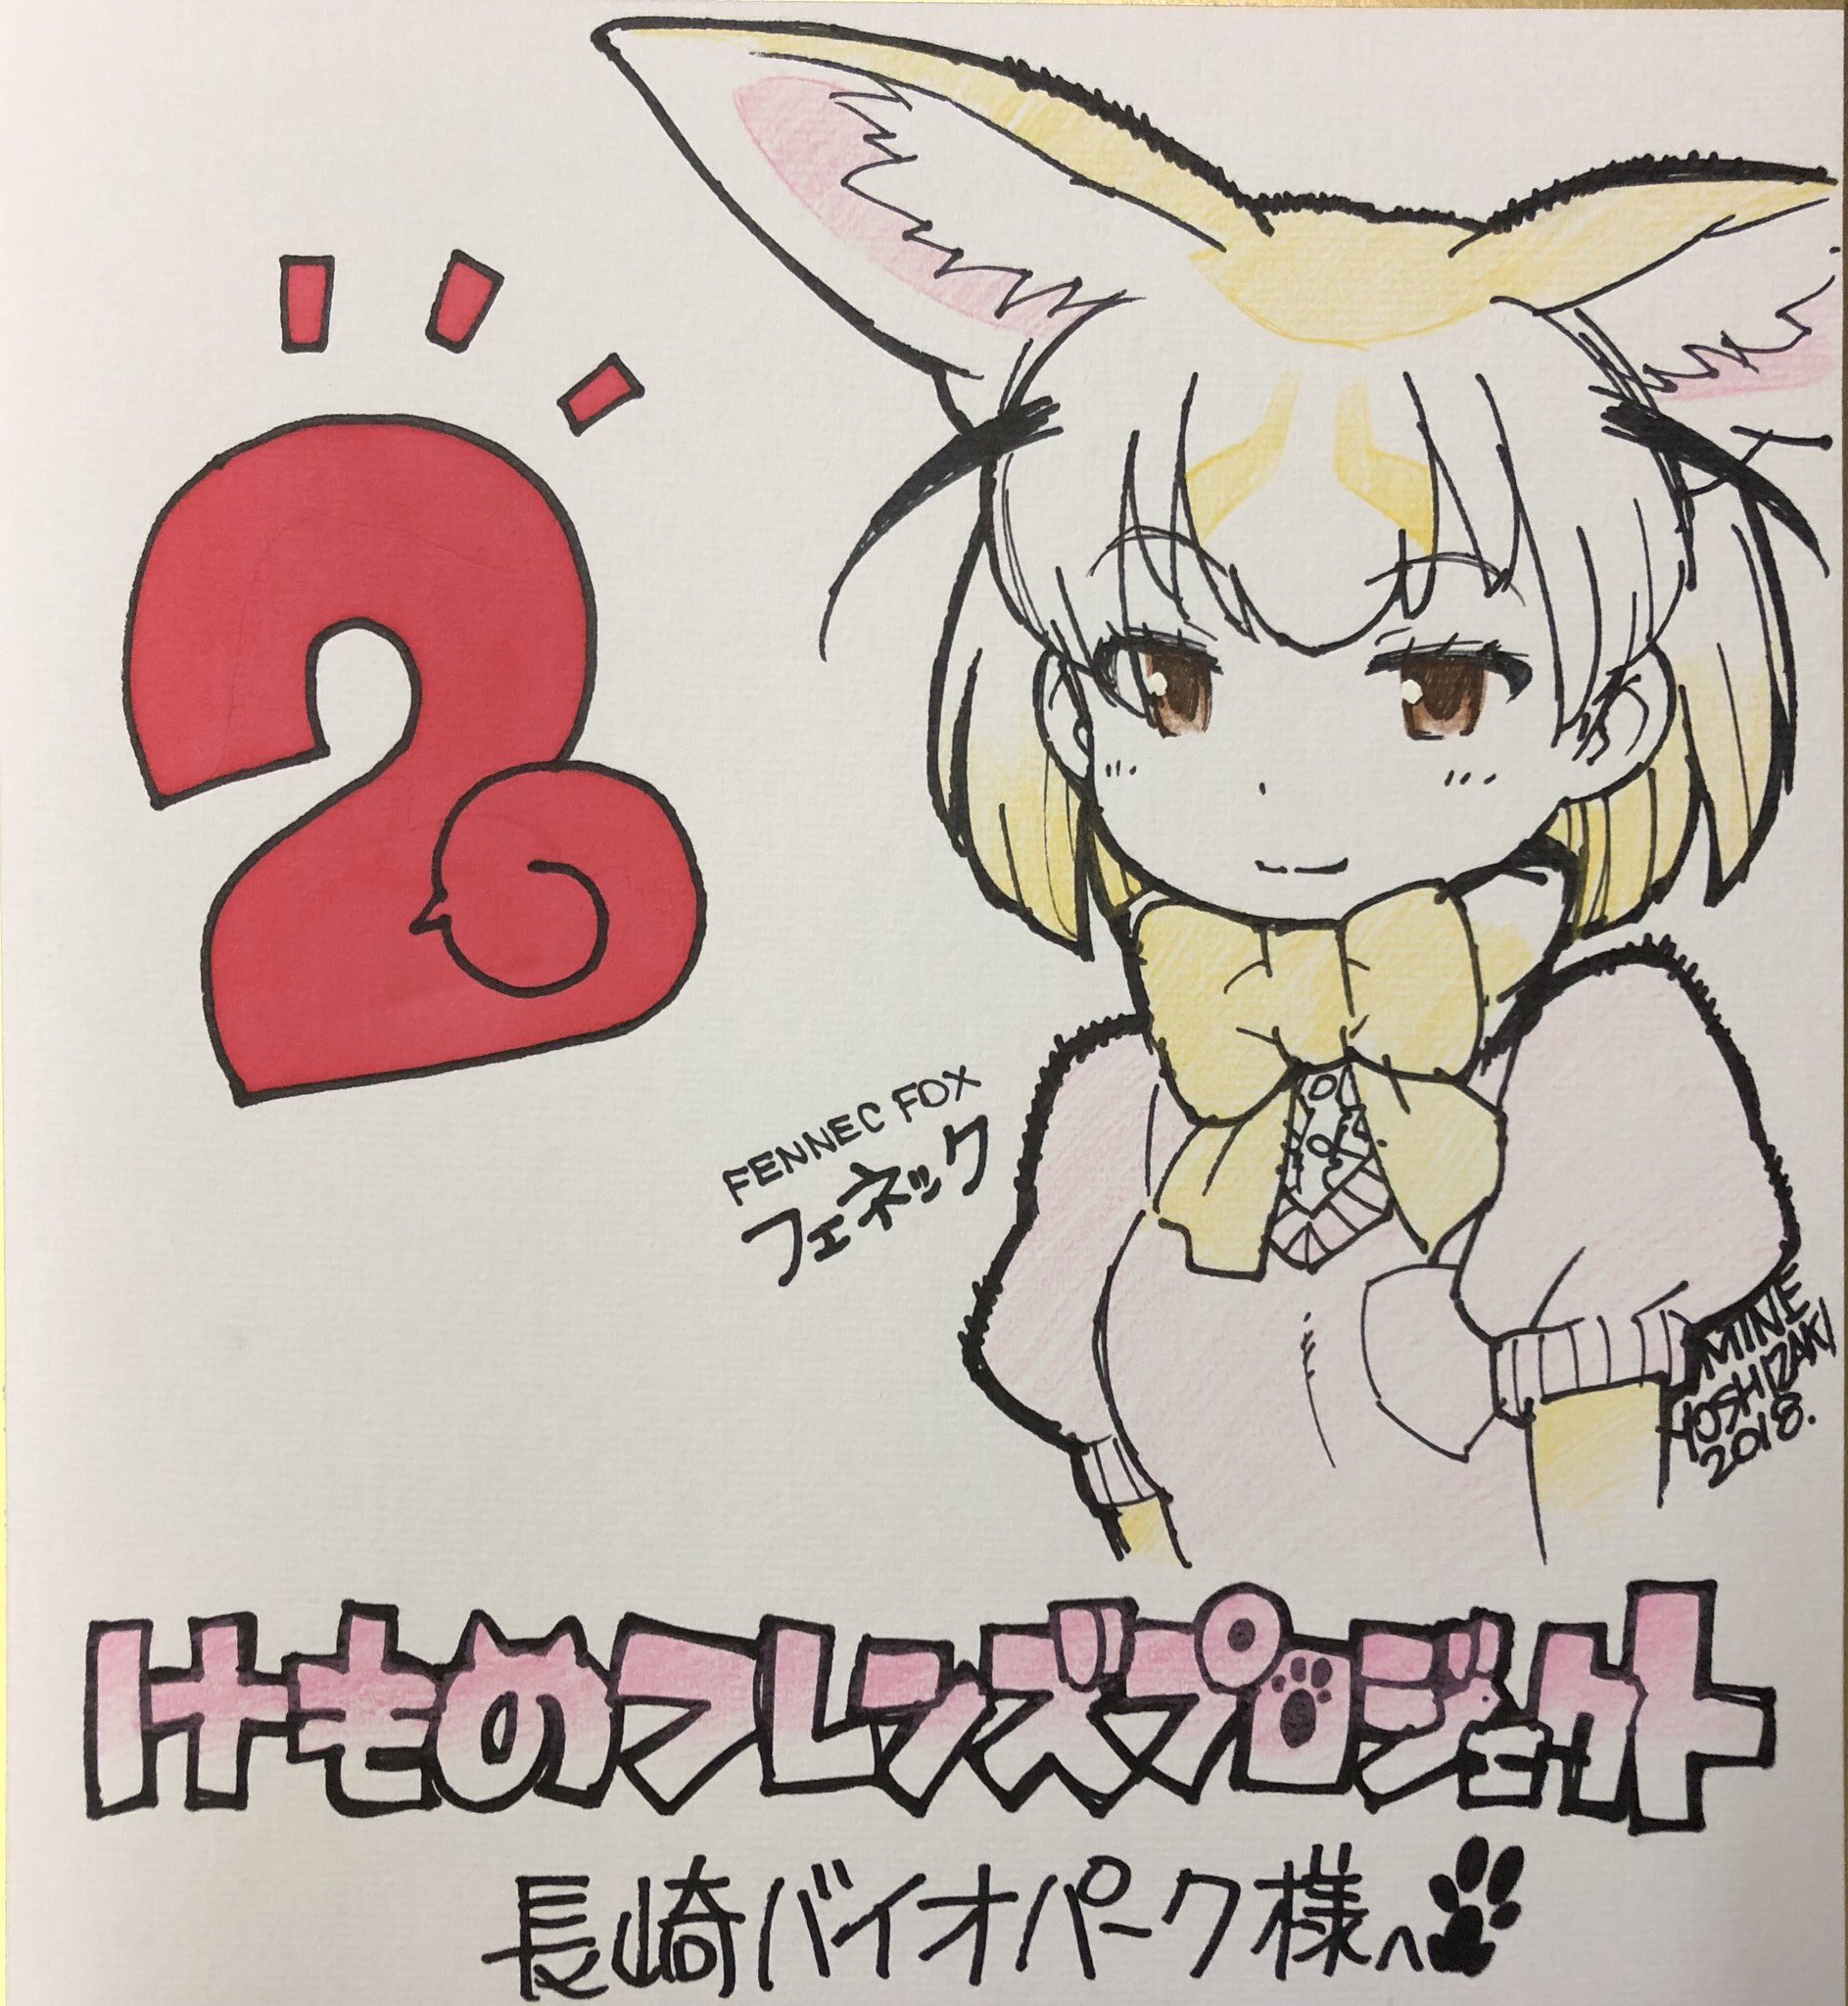 A signed drawing sent to Nagasaki Bio Park in October 2018 as part of a Season 2 promotion. Posted to their Twitter.